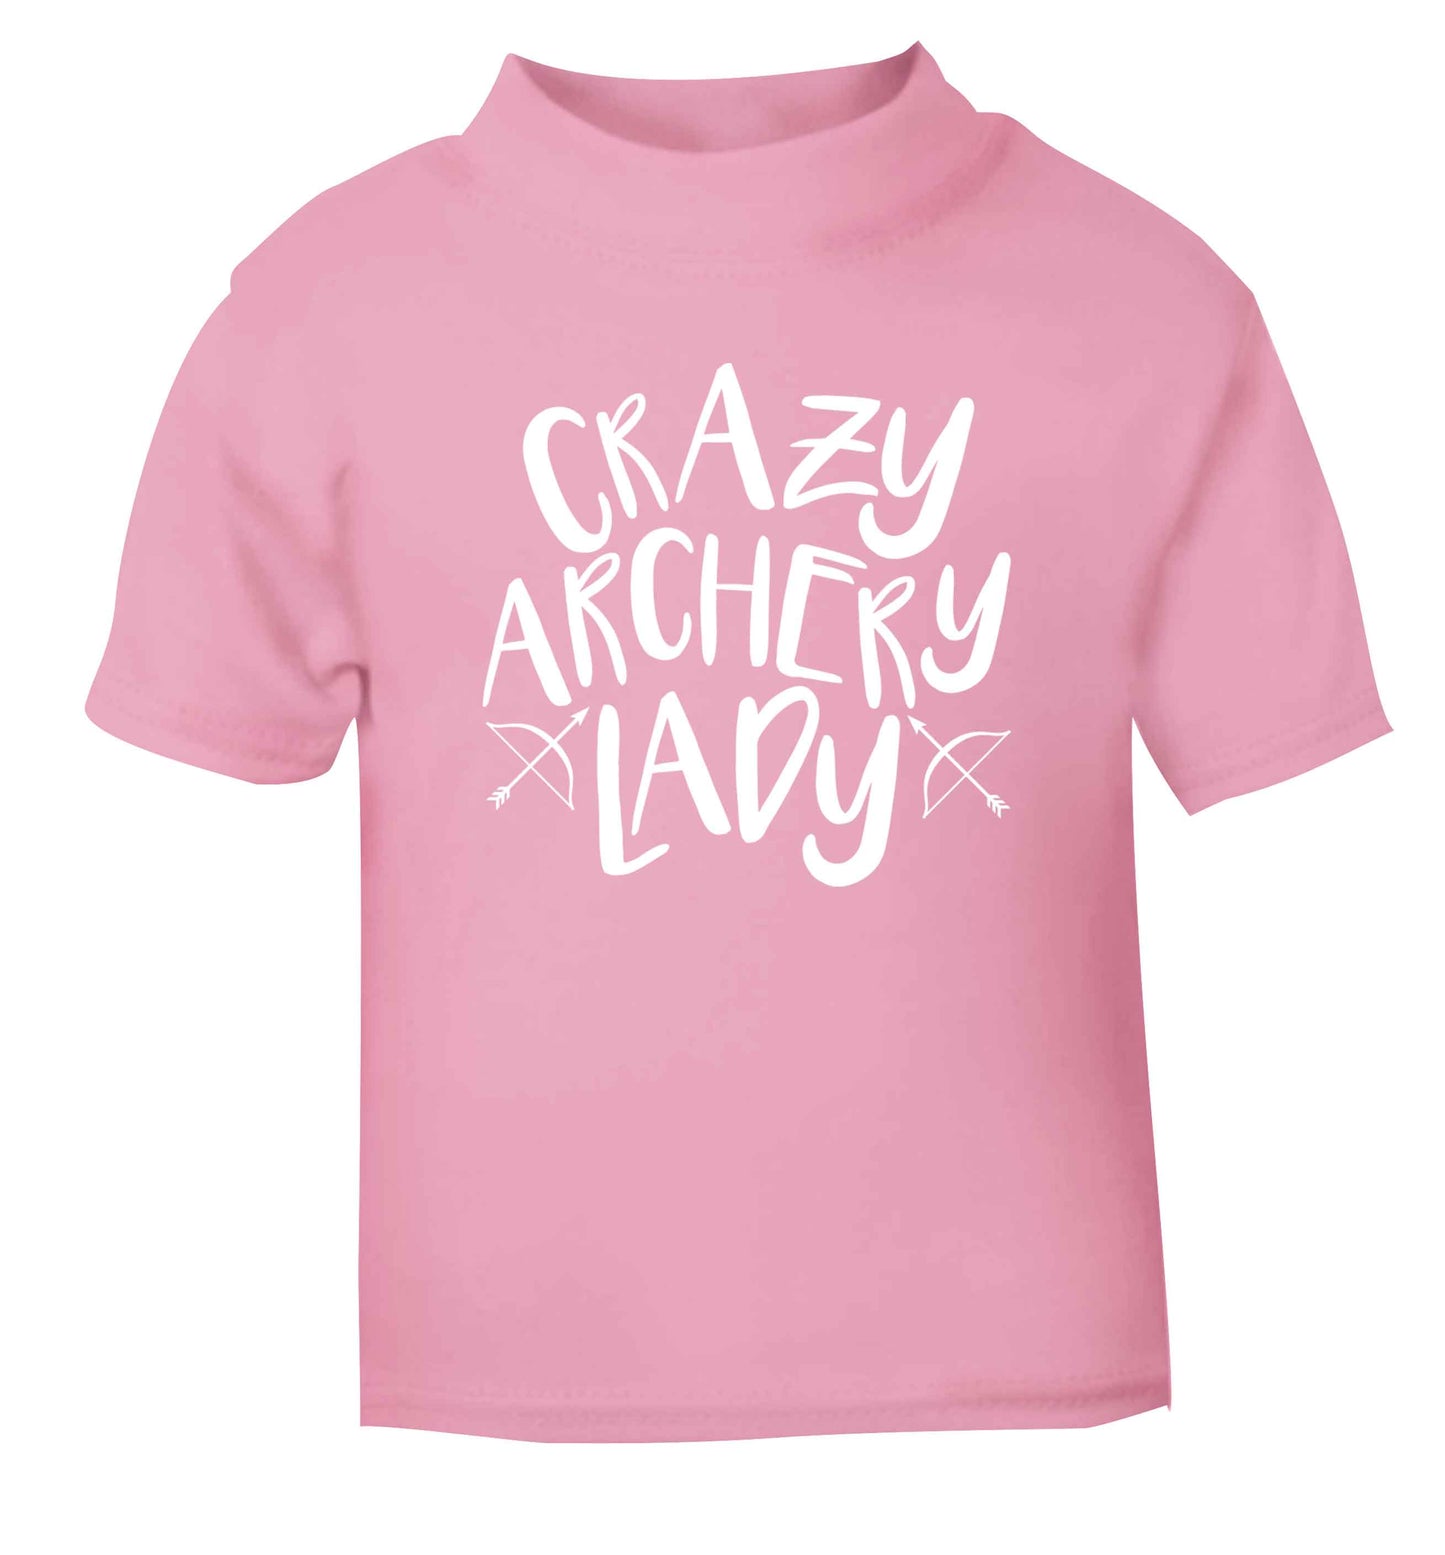 Crazy archery lady light pink Baby Toddler Tshirt 2 Years